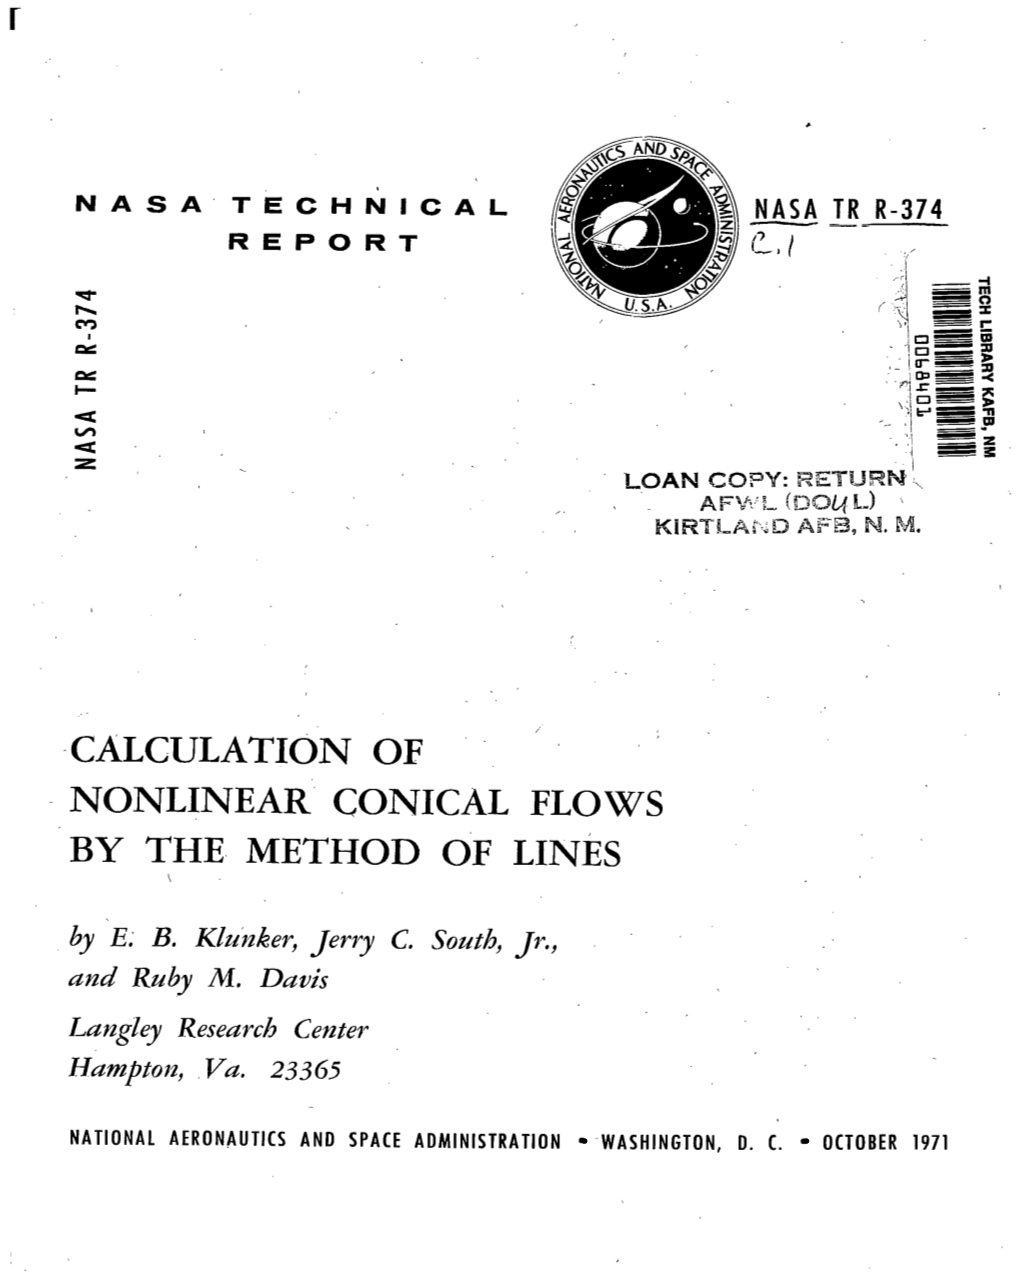 CALCULATION of NONLINEAR CONICAL FLOWS by the METHOD of LINES I